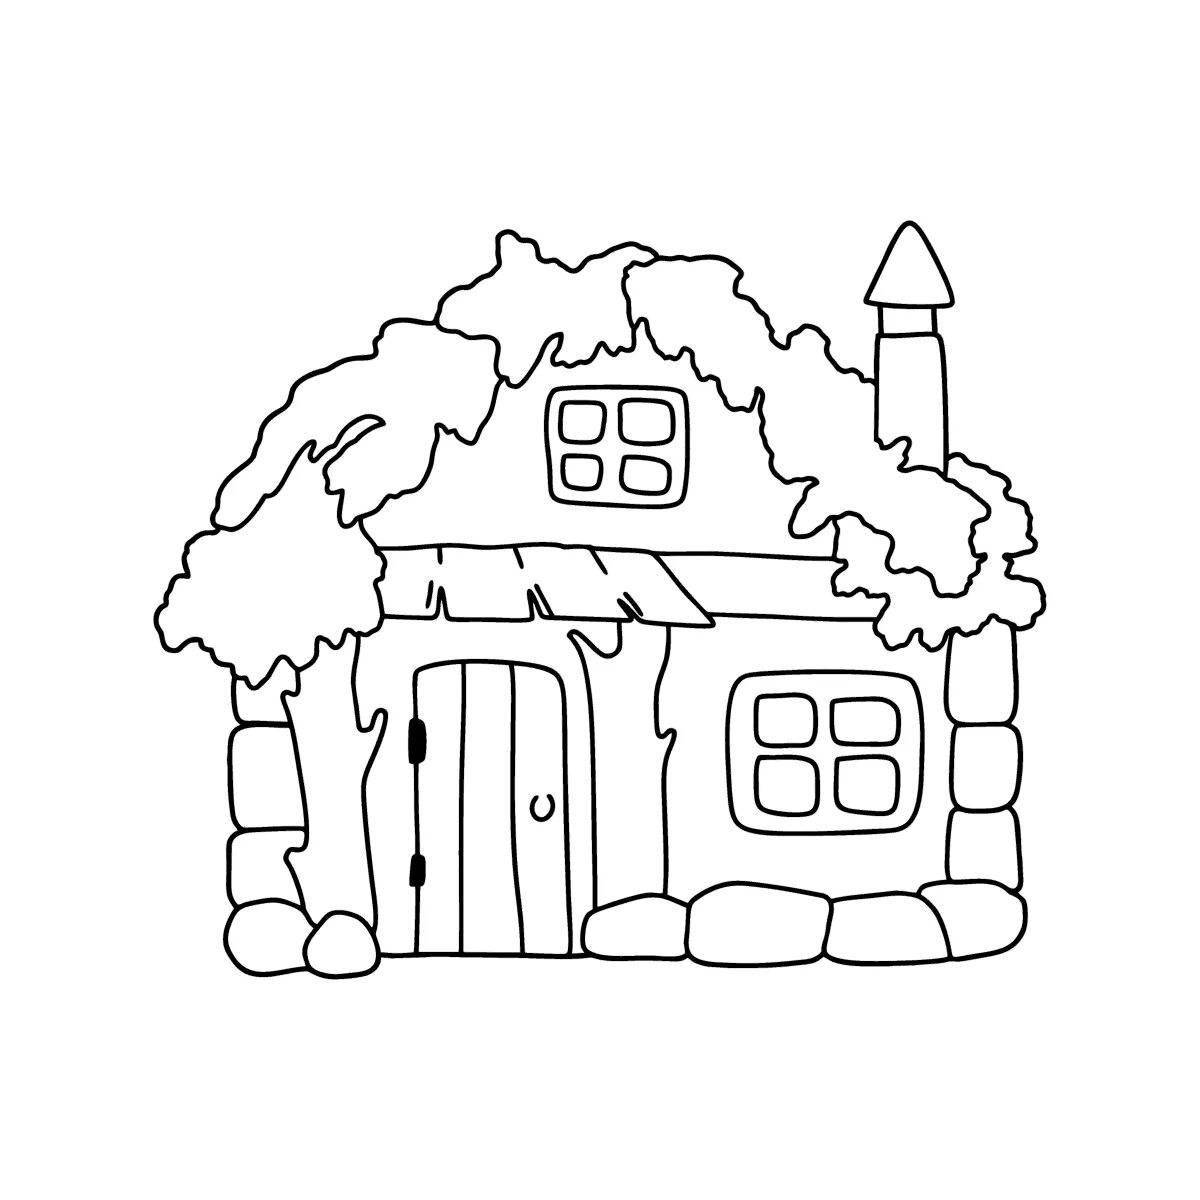 Coloring book magical hut for kids